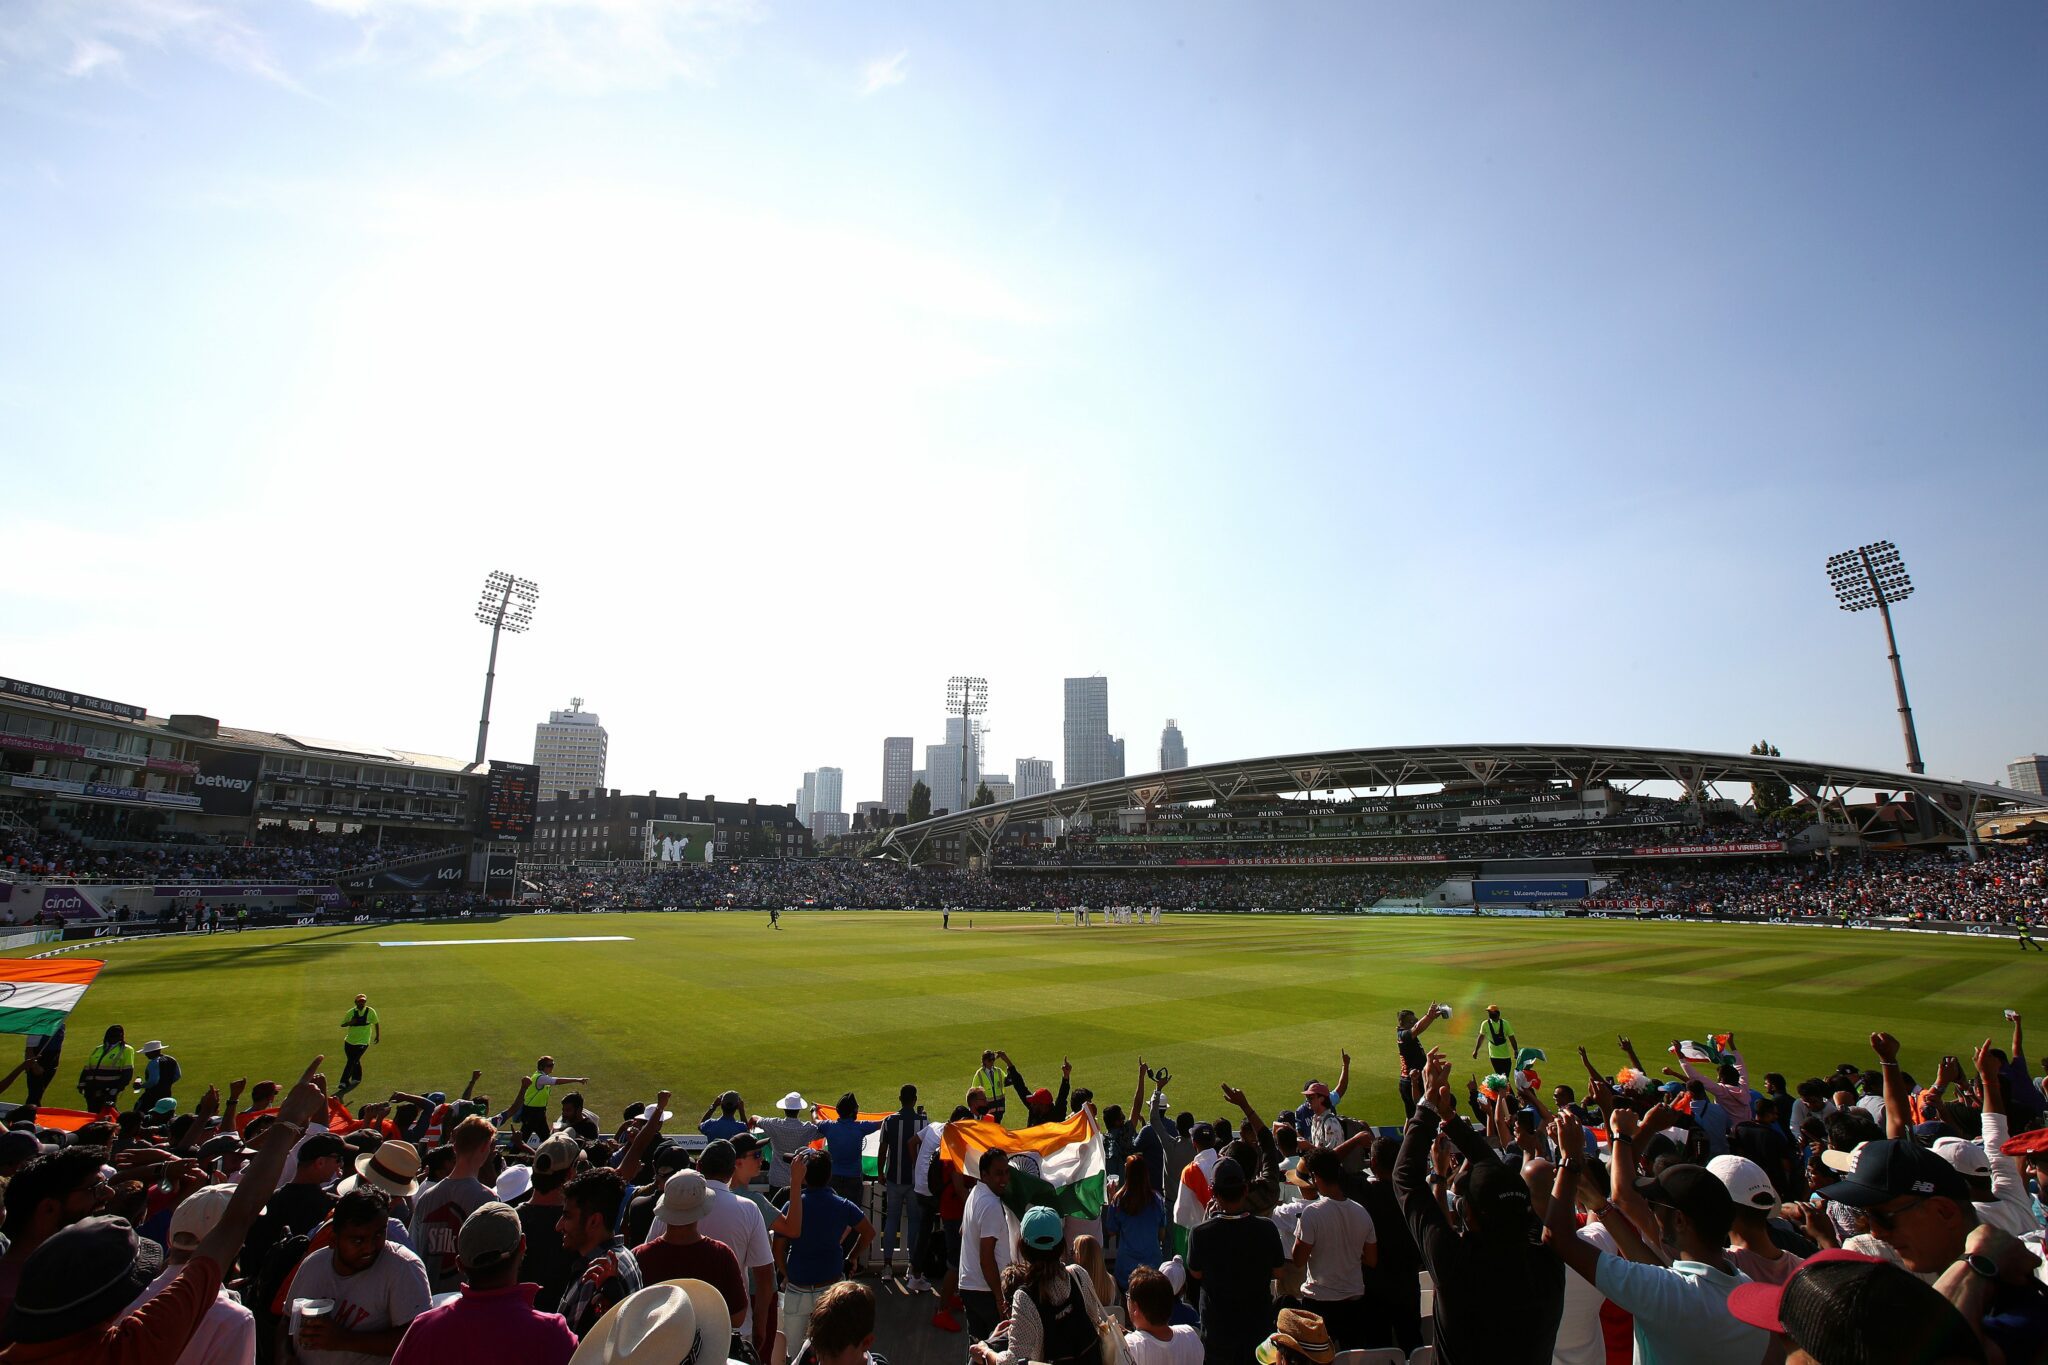 Image of the Kia Oval cricket ground and a crowd cheering, with a skyline in the background